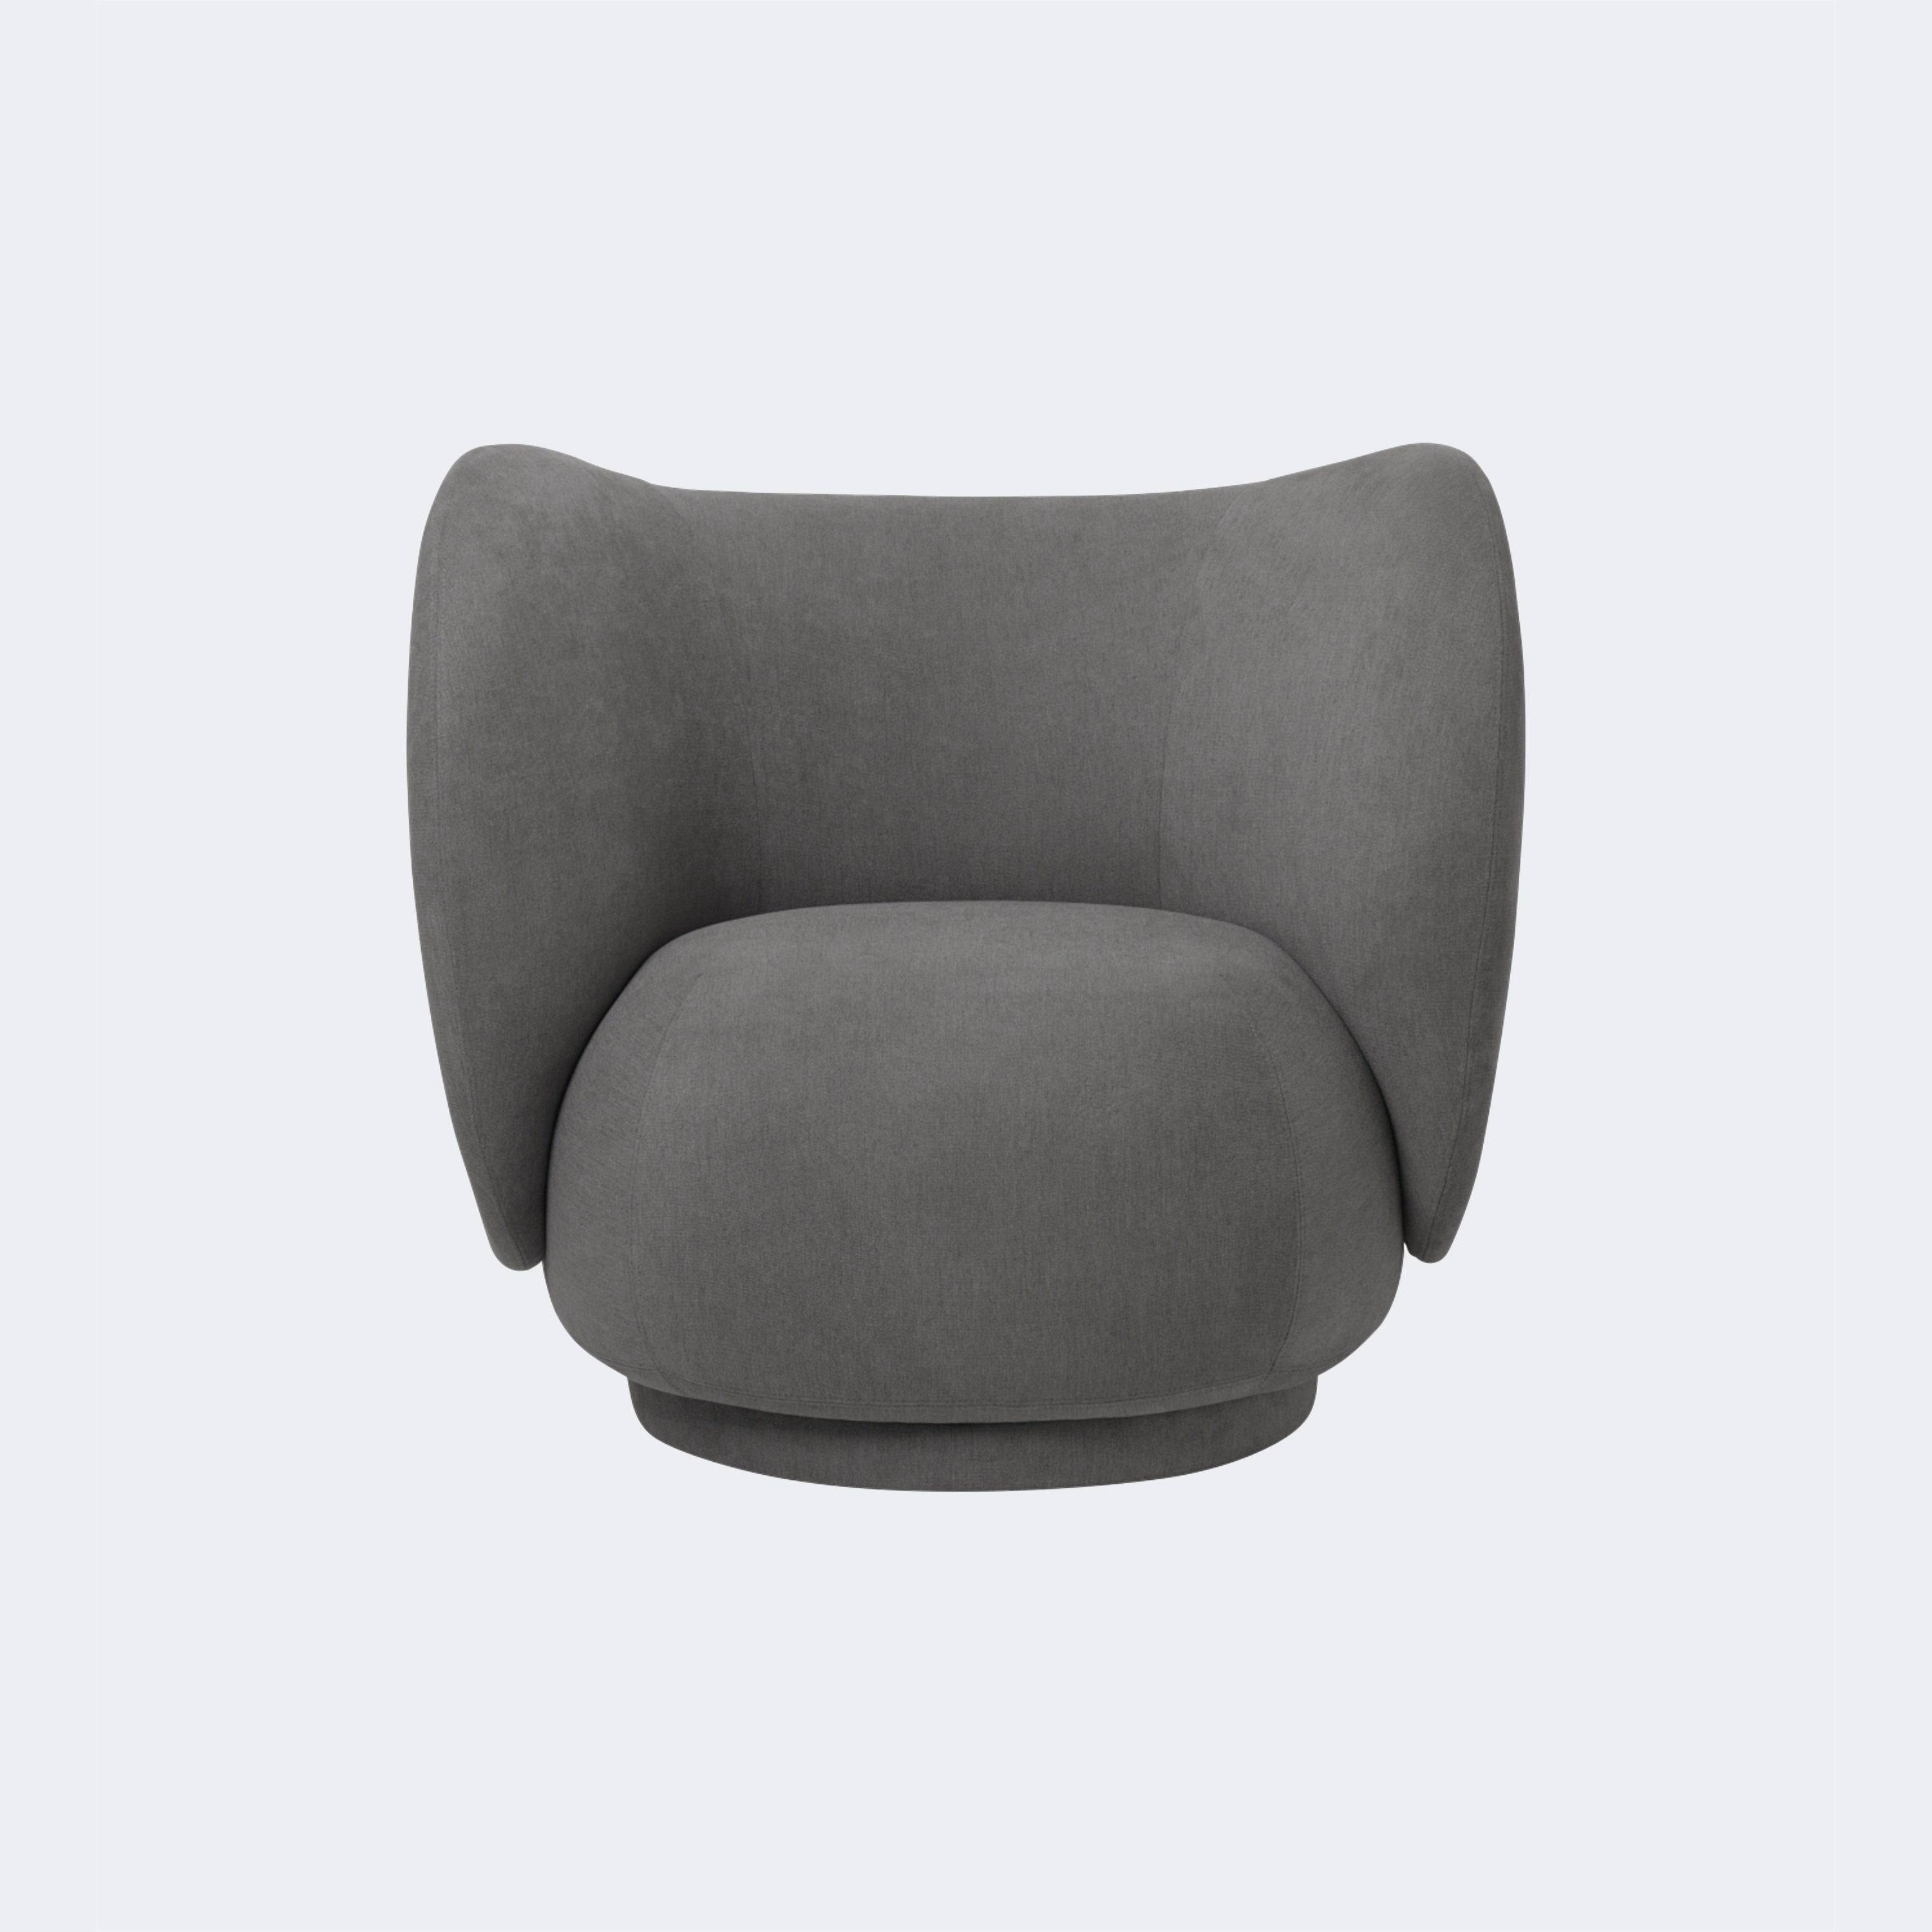 Ferm Living Rico Lounge Chair - Swivel Base Made To Order (18-20 Weeks) Brushed Grey - KANSO#Fabric_Brushed Grey